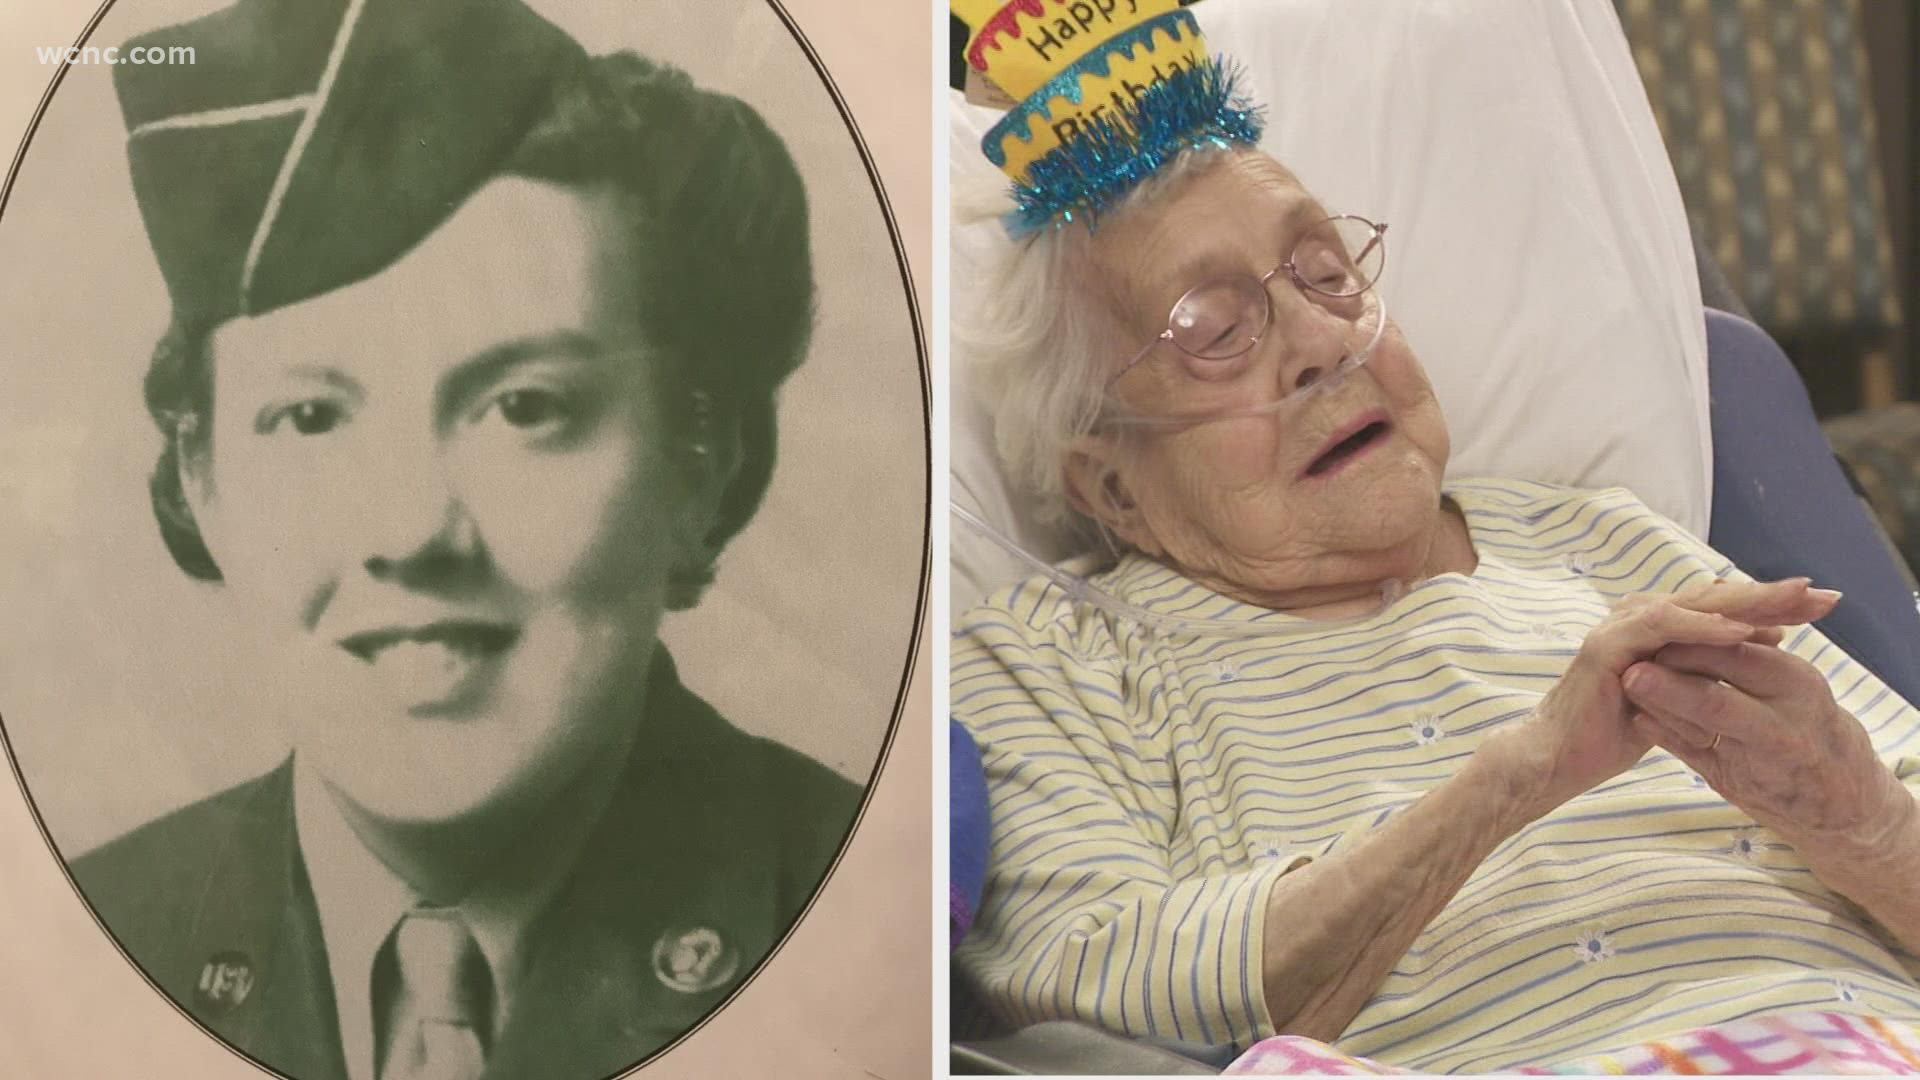 WWII Veteran Bernice Liverette celebrated her 103rd birthday in style Wednesday inside the North Carolina State Veteran's Home.